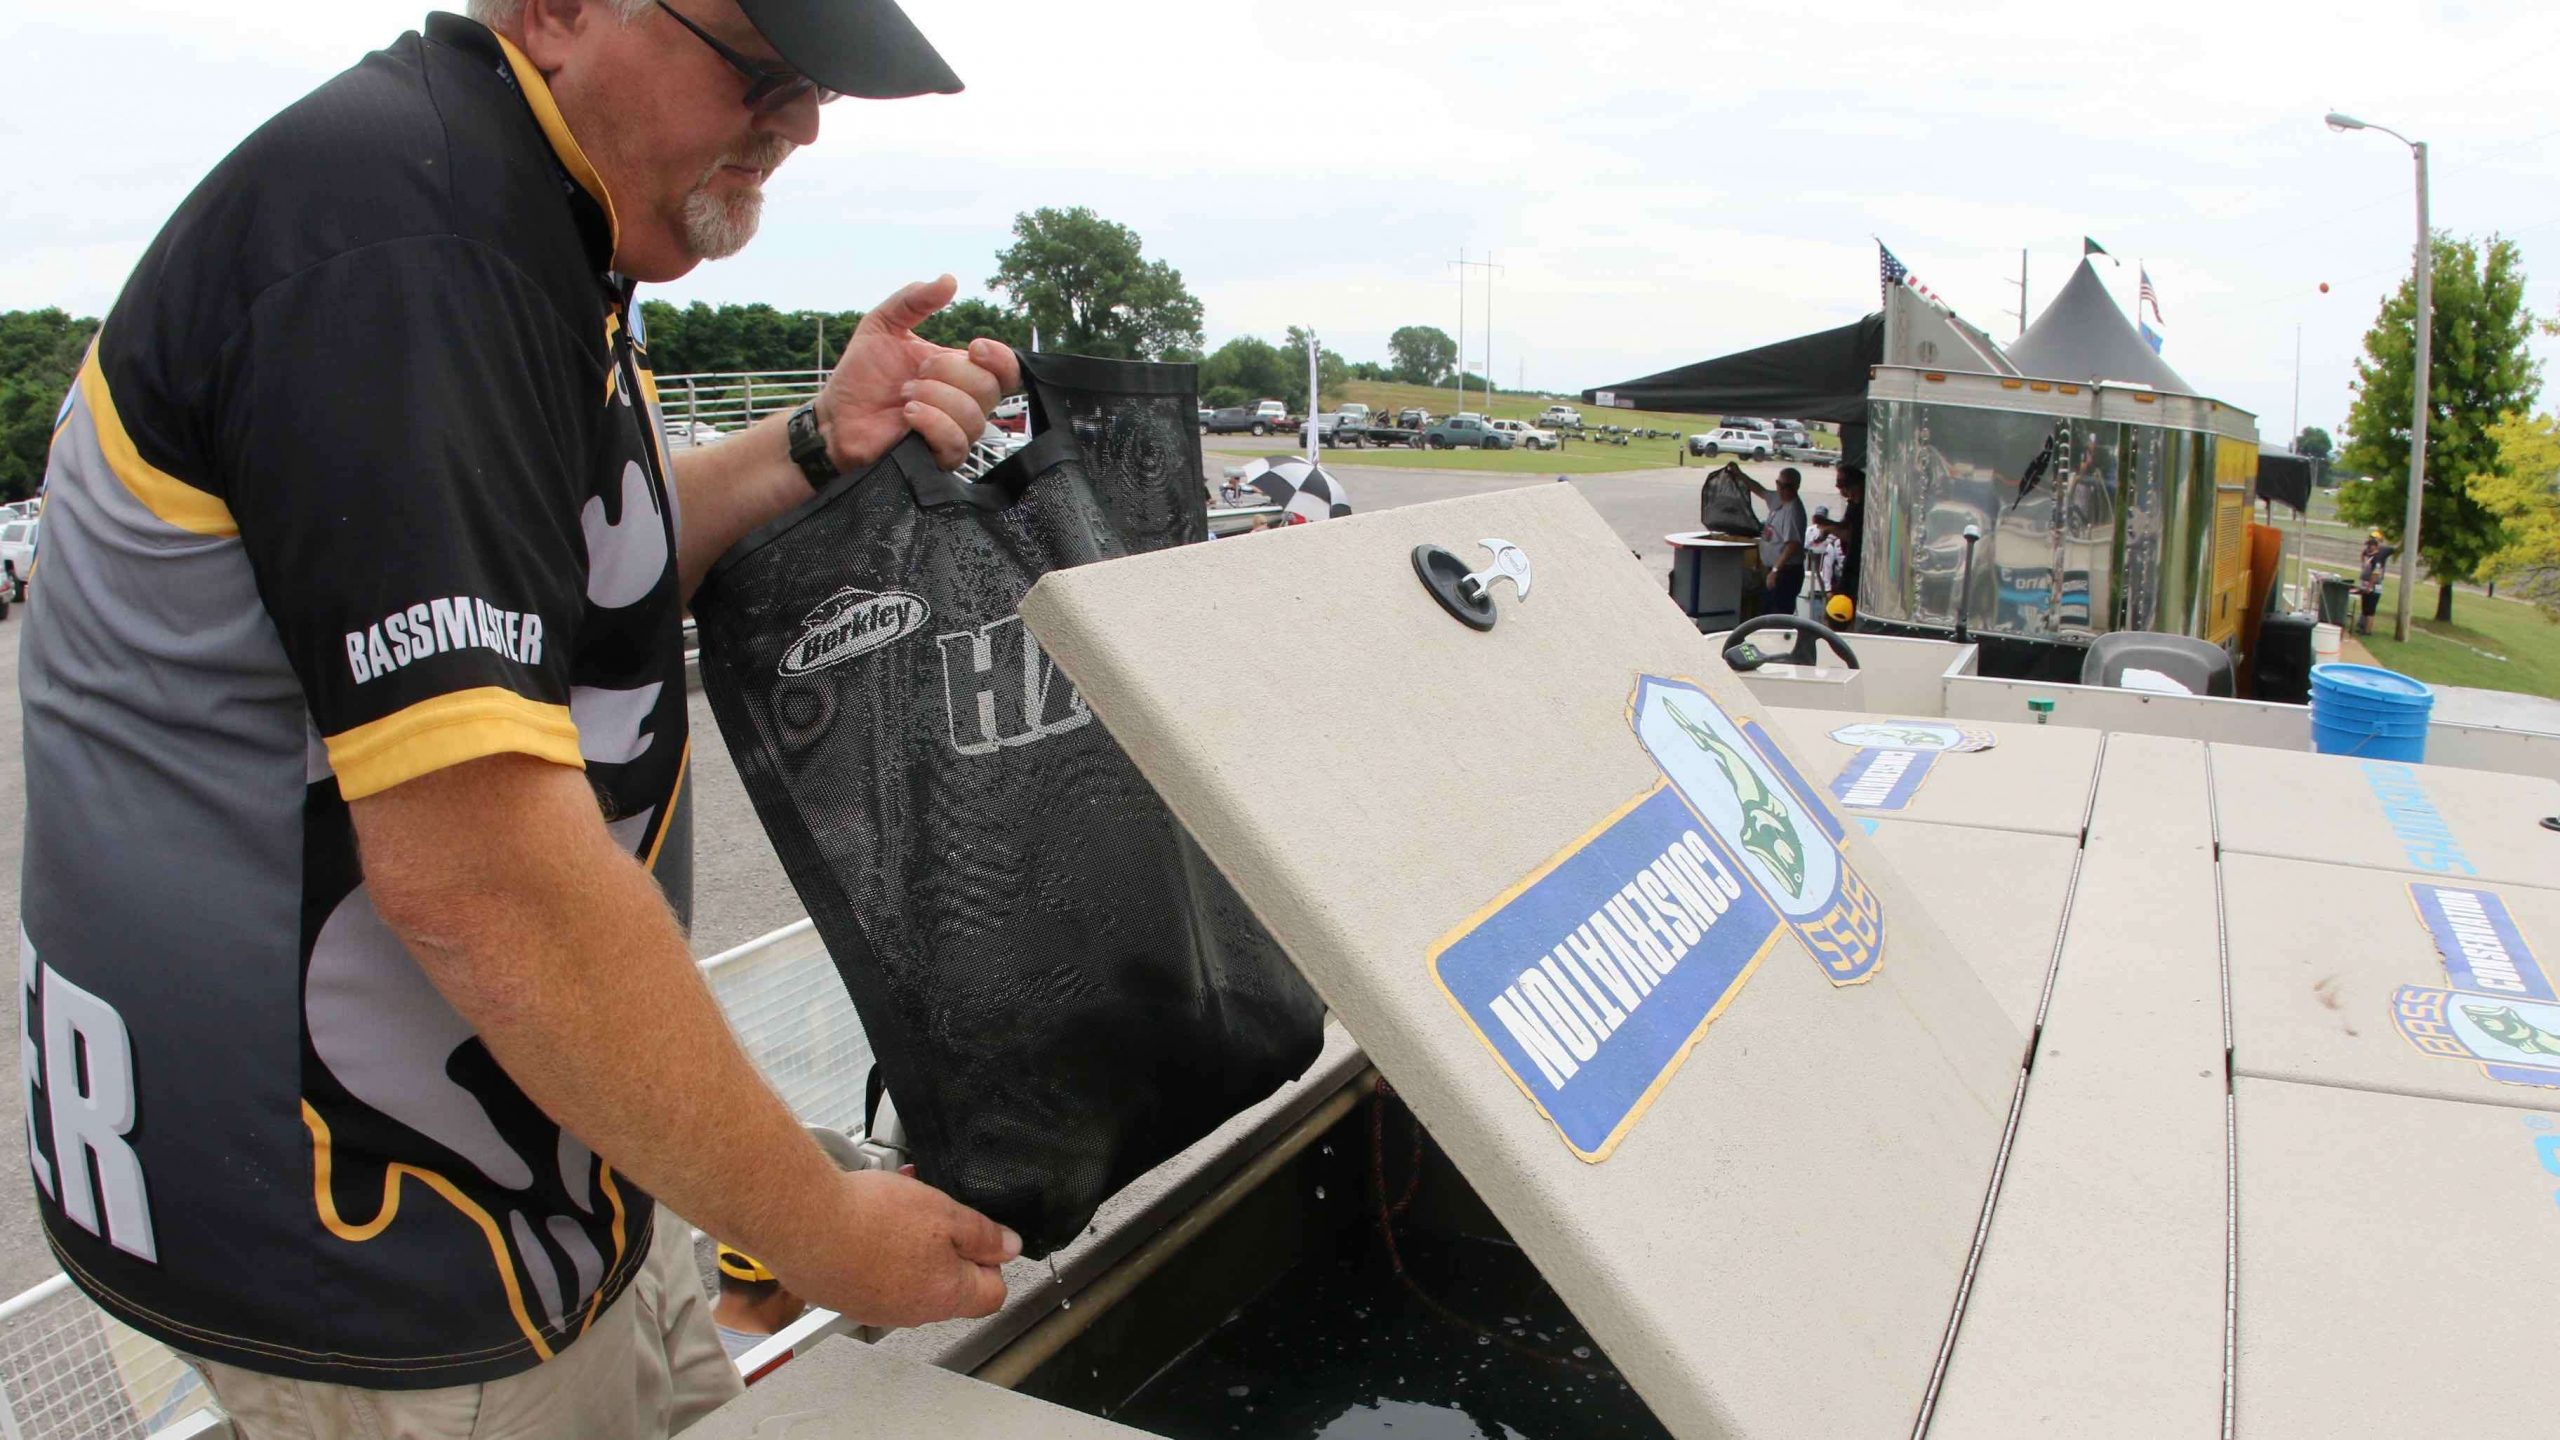 B.A.S.S. tournament official John Norris was manning the live release boat near the weigh-in stage.